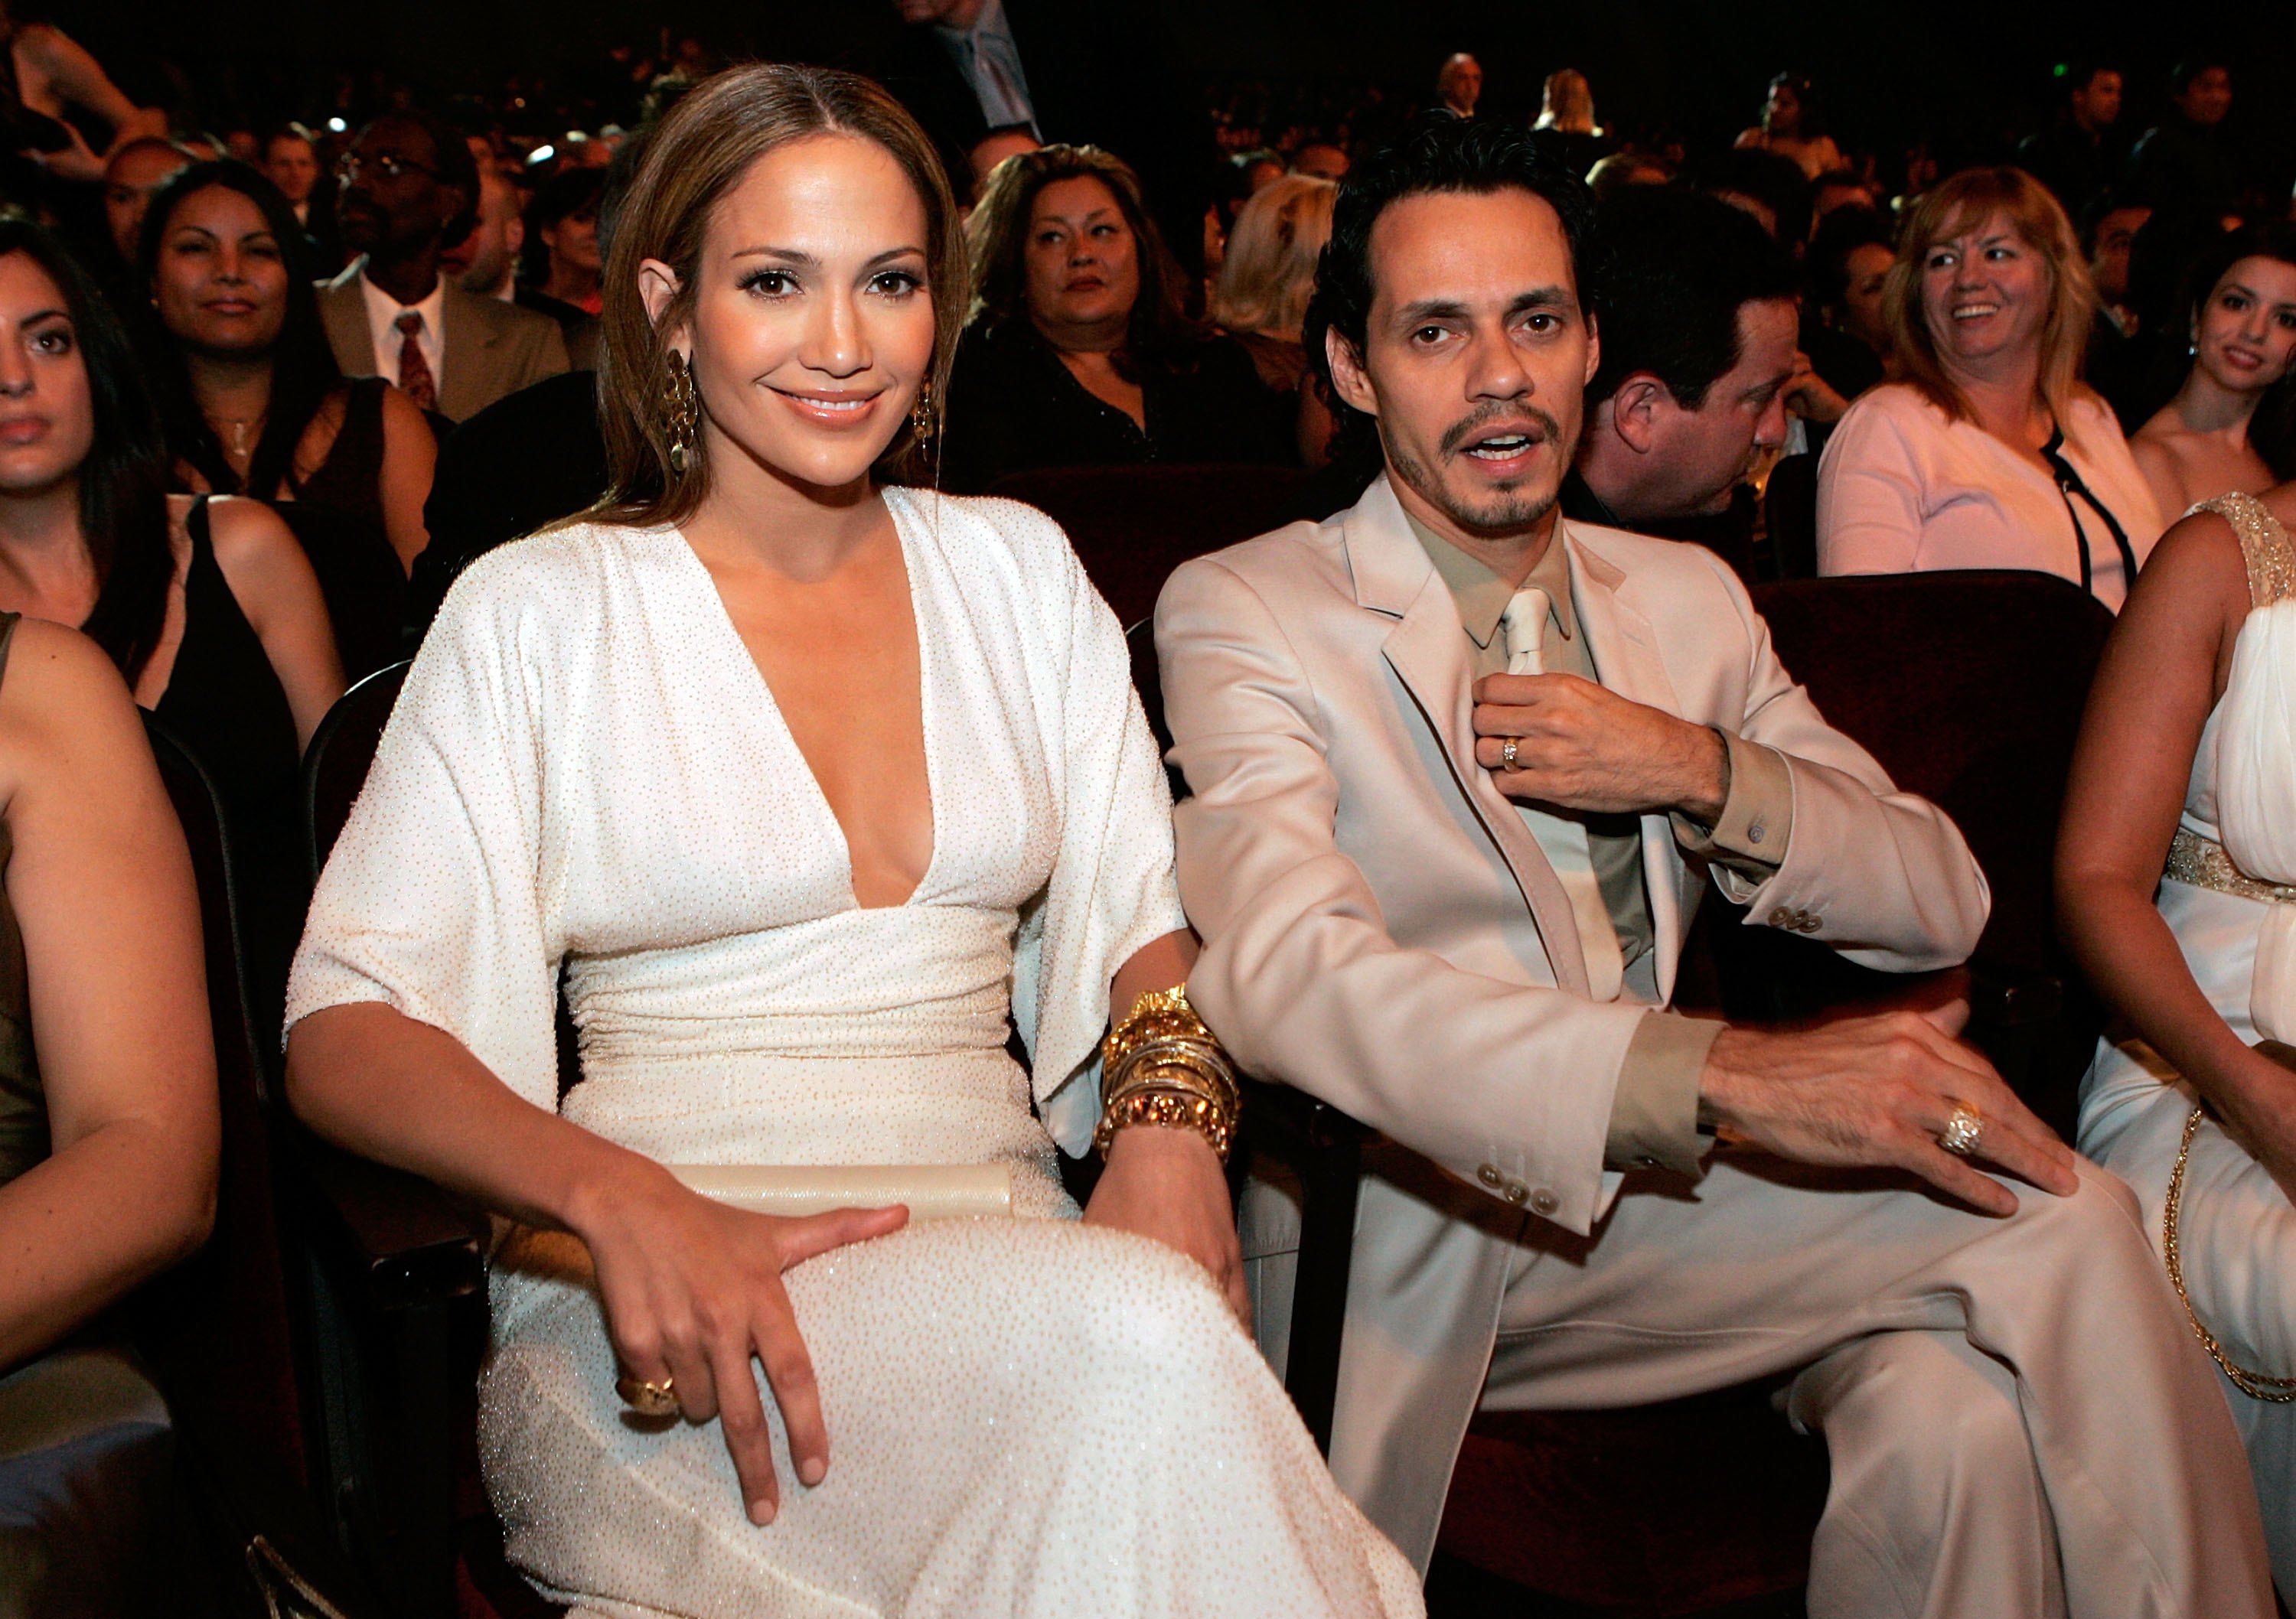 Actress/Singer Jennifer Lopez (L) and Marc Anthony in the audience at the 2006 NCLR ALMA Awards at the Shrine Auditorium on May 7, 2006 in Los Angeles, California.